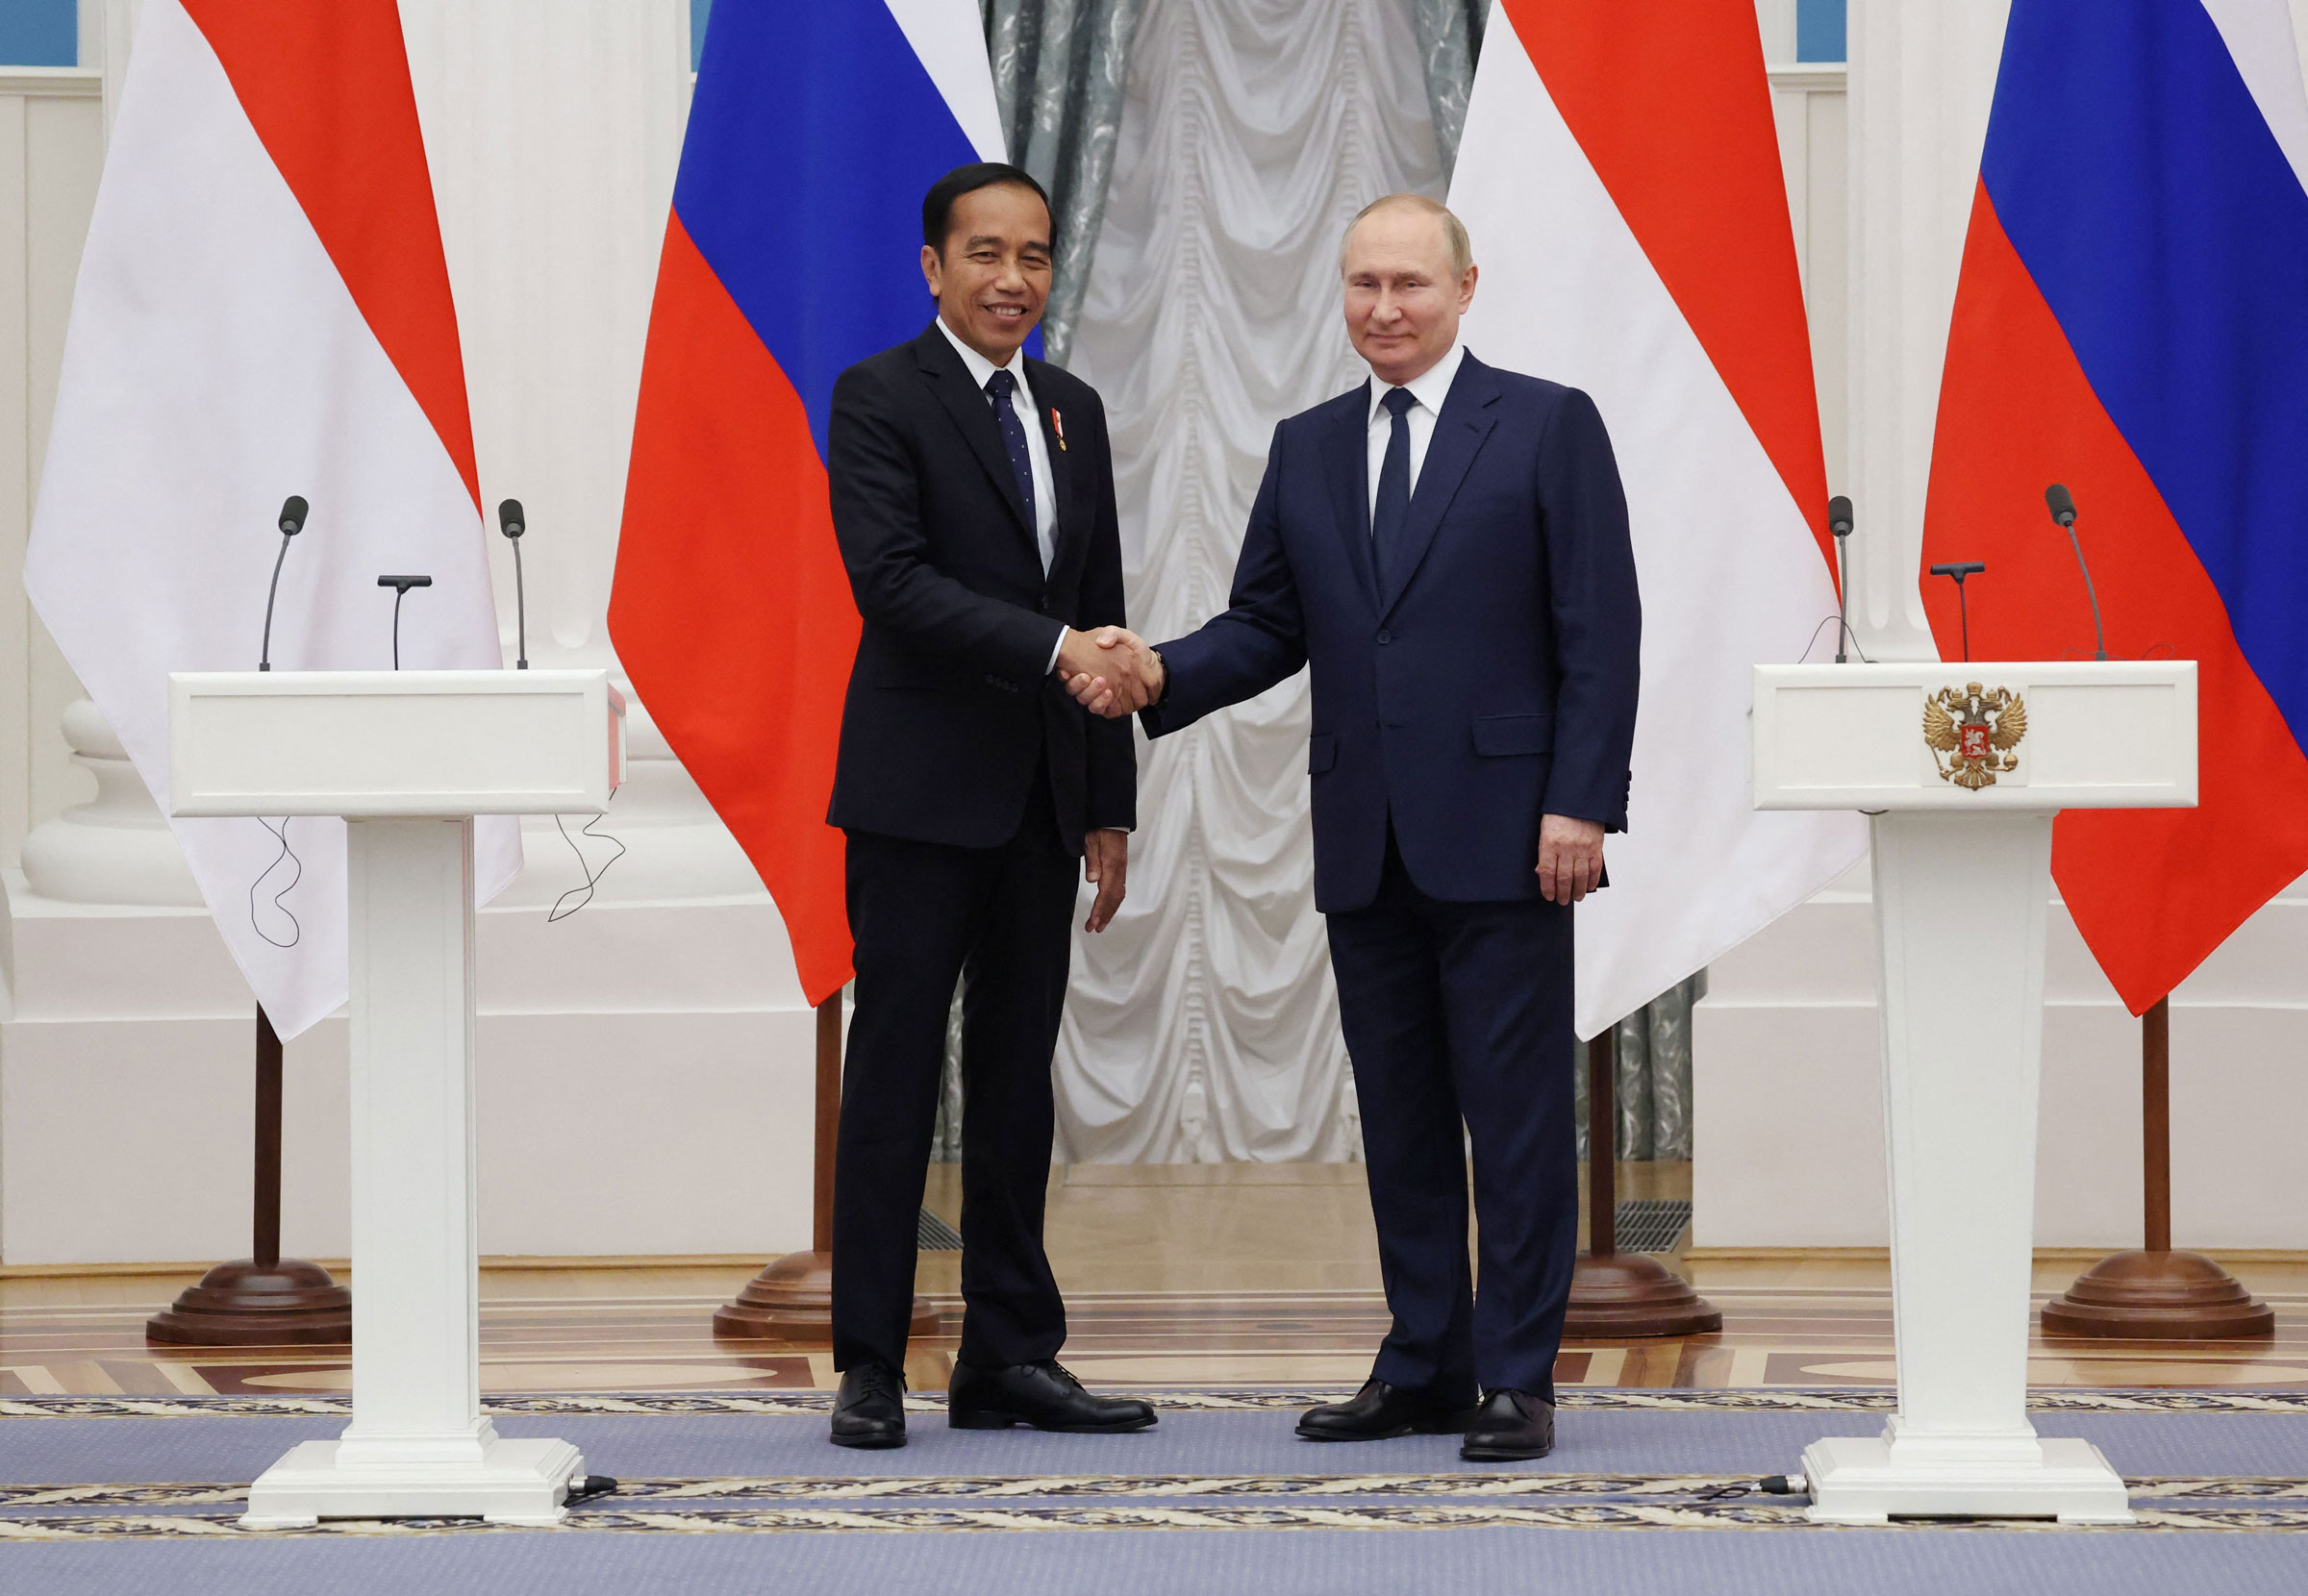 Russian President Vladimir Putin shakes hands with Indonesian President Joko Widodo after a press conference at the Kremlin in Moscow, June 30, 2022. (Vyacheslav Prokofiev—Sputnik/AFP/Getty Images)